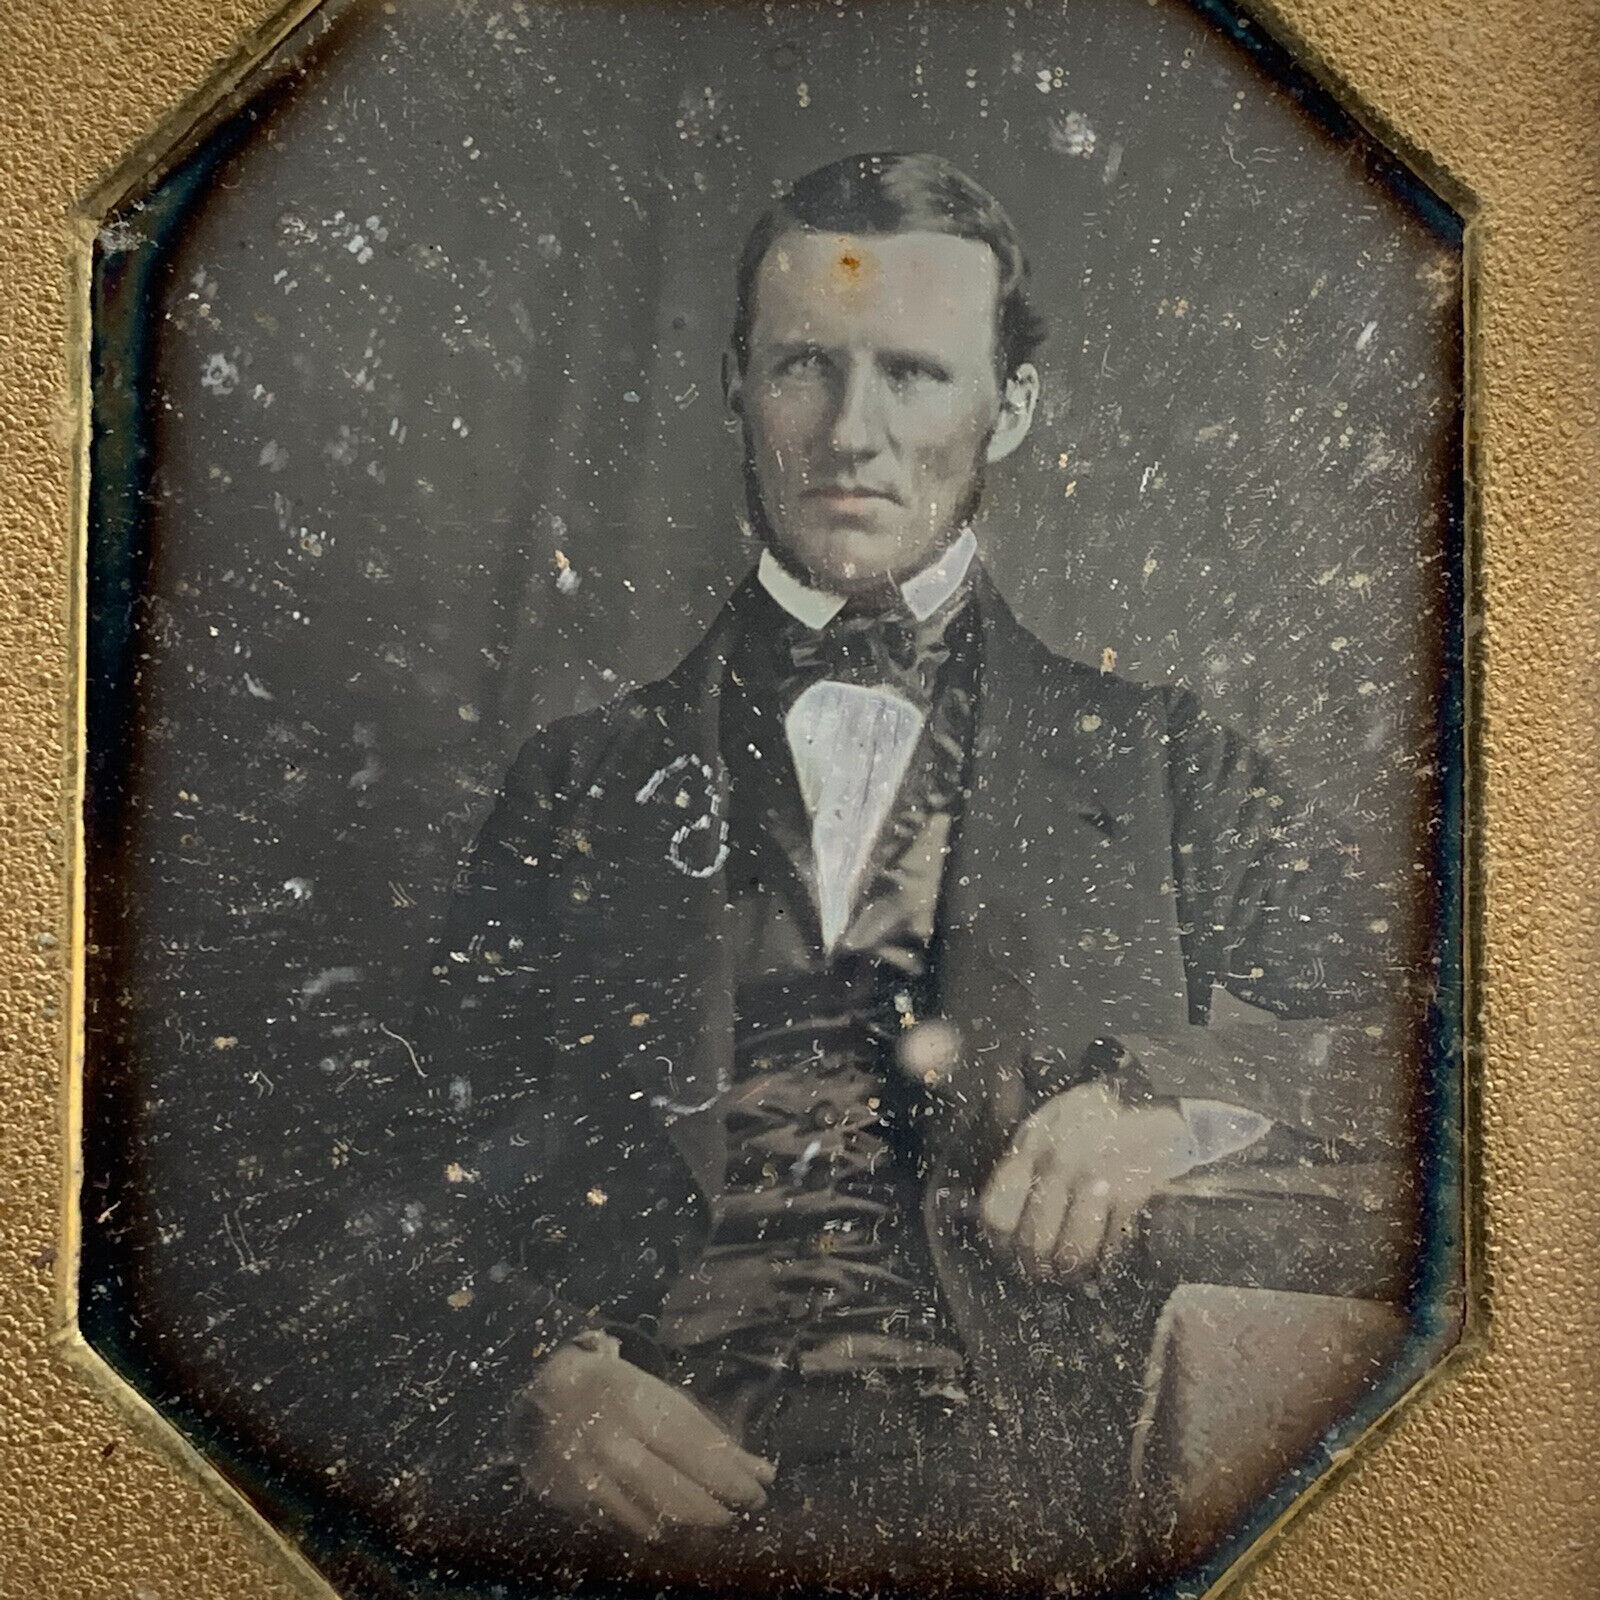 Antique Daguerreotype Photograph Very Handsome Dapper Young Man No Wipe Marks